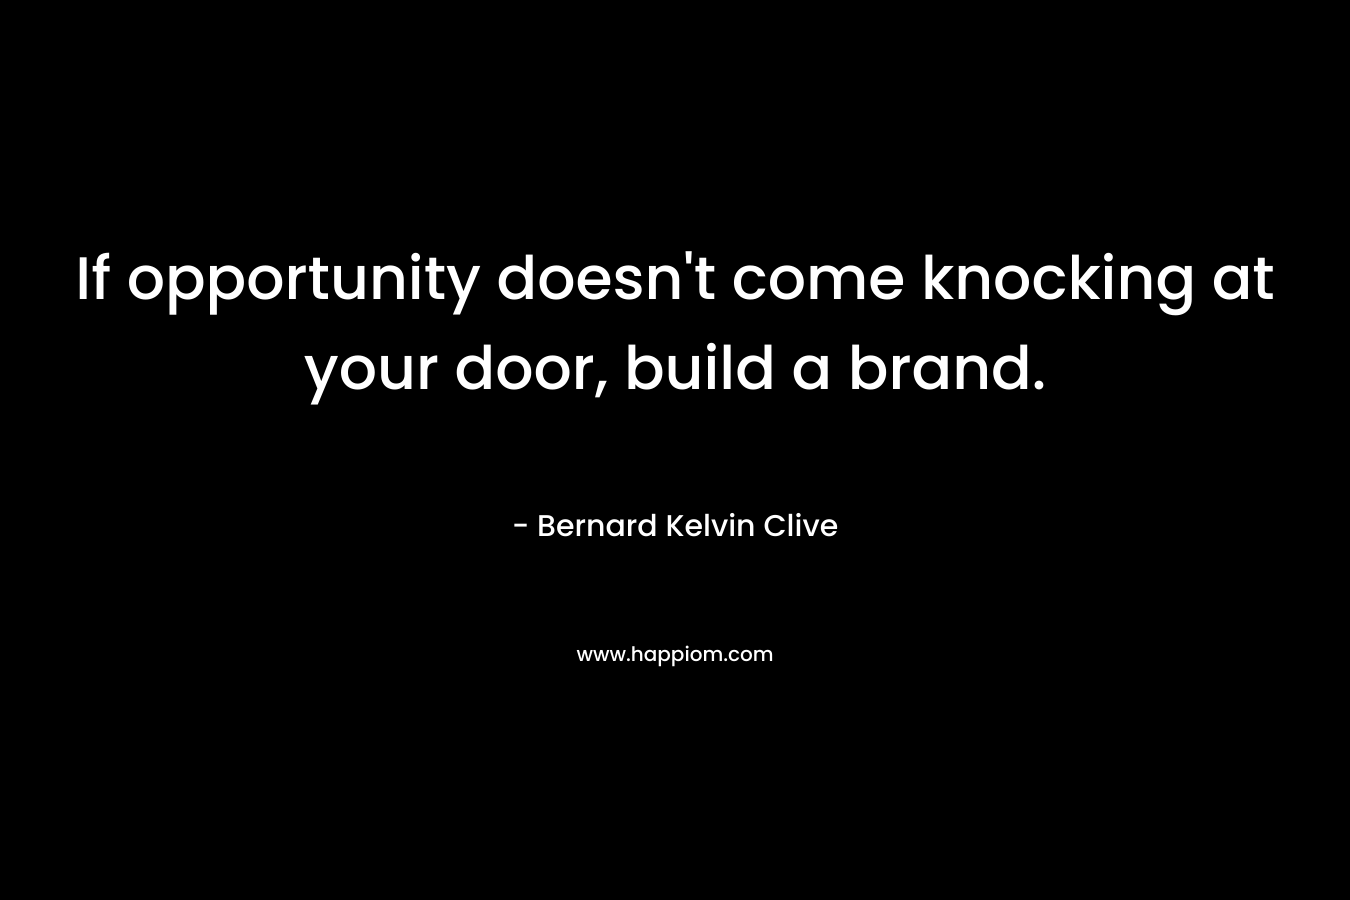 If opportunity doesn’t come knocking at your door, build a brand. – Bernard Kelvin Clive